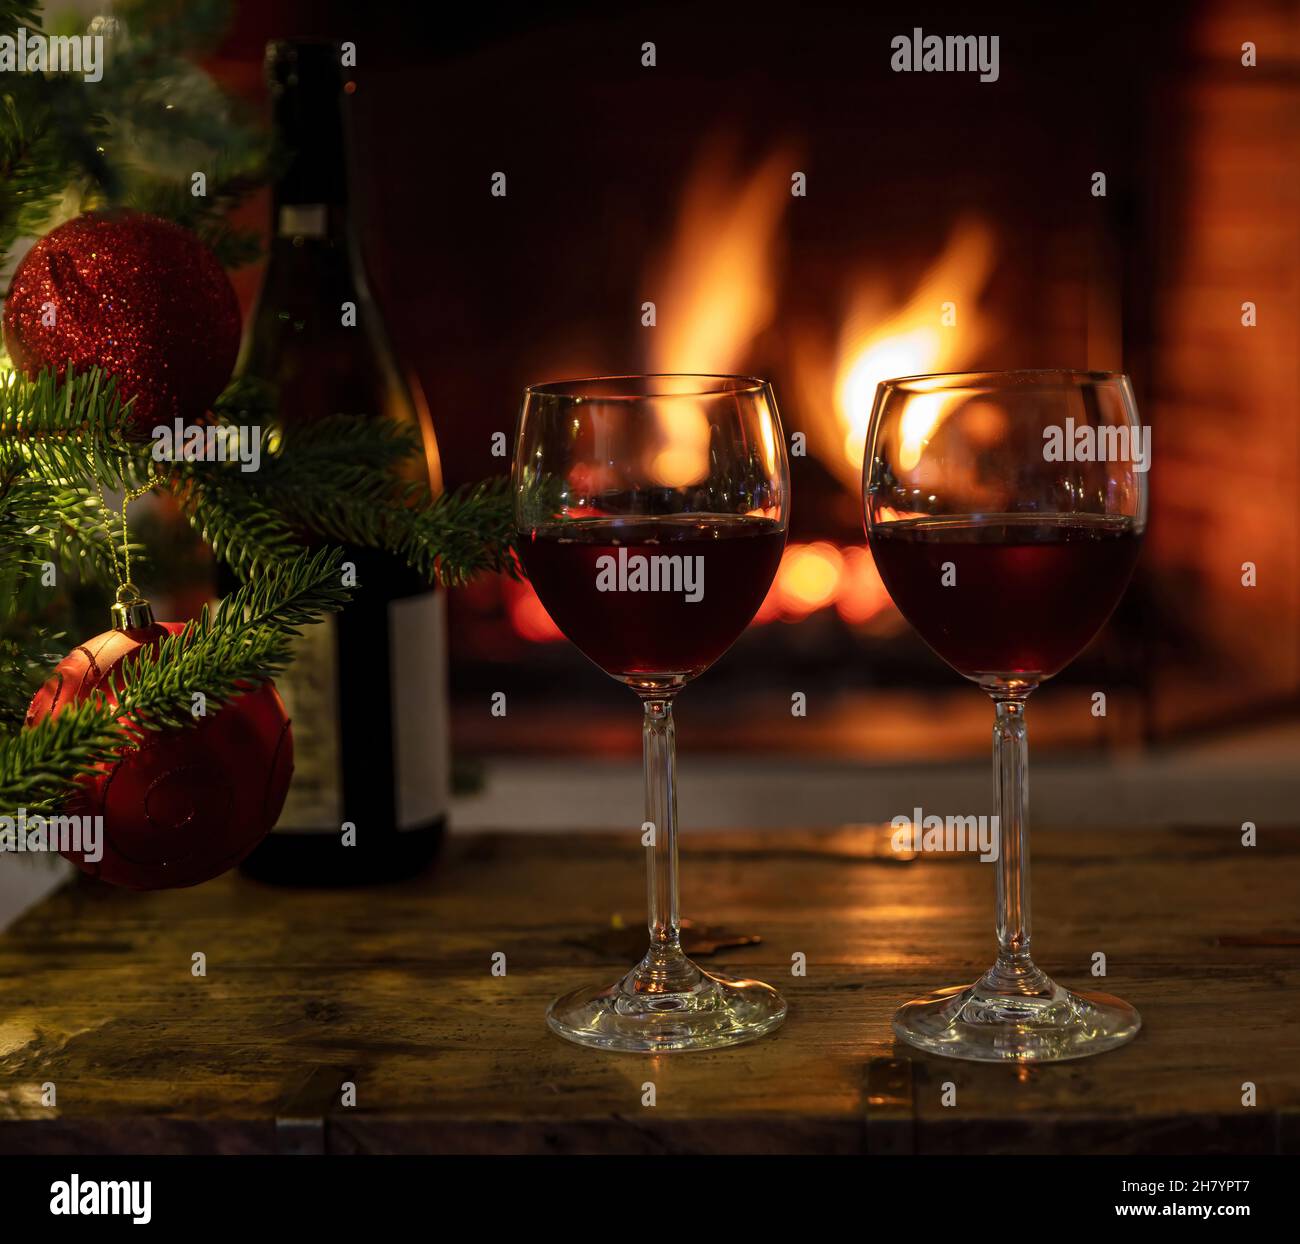 Mulled wine glasses on table in front of burning fireplace. Stock